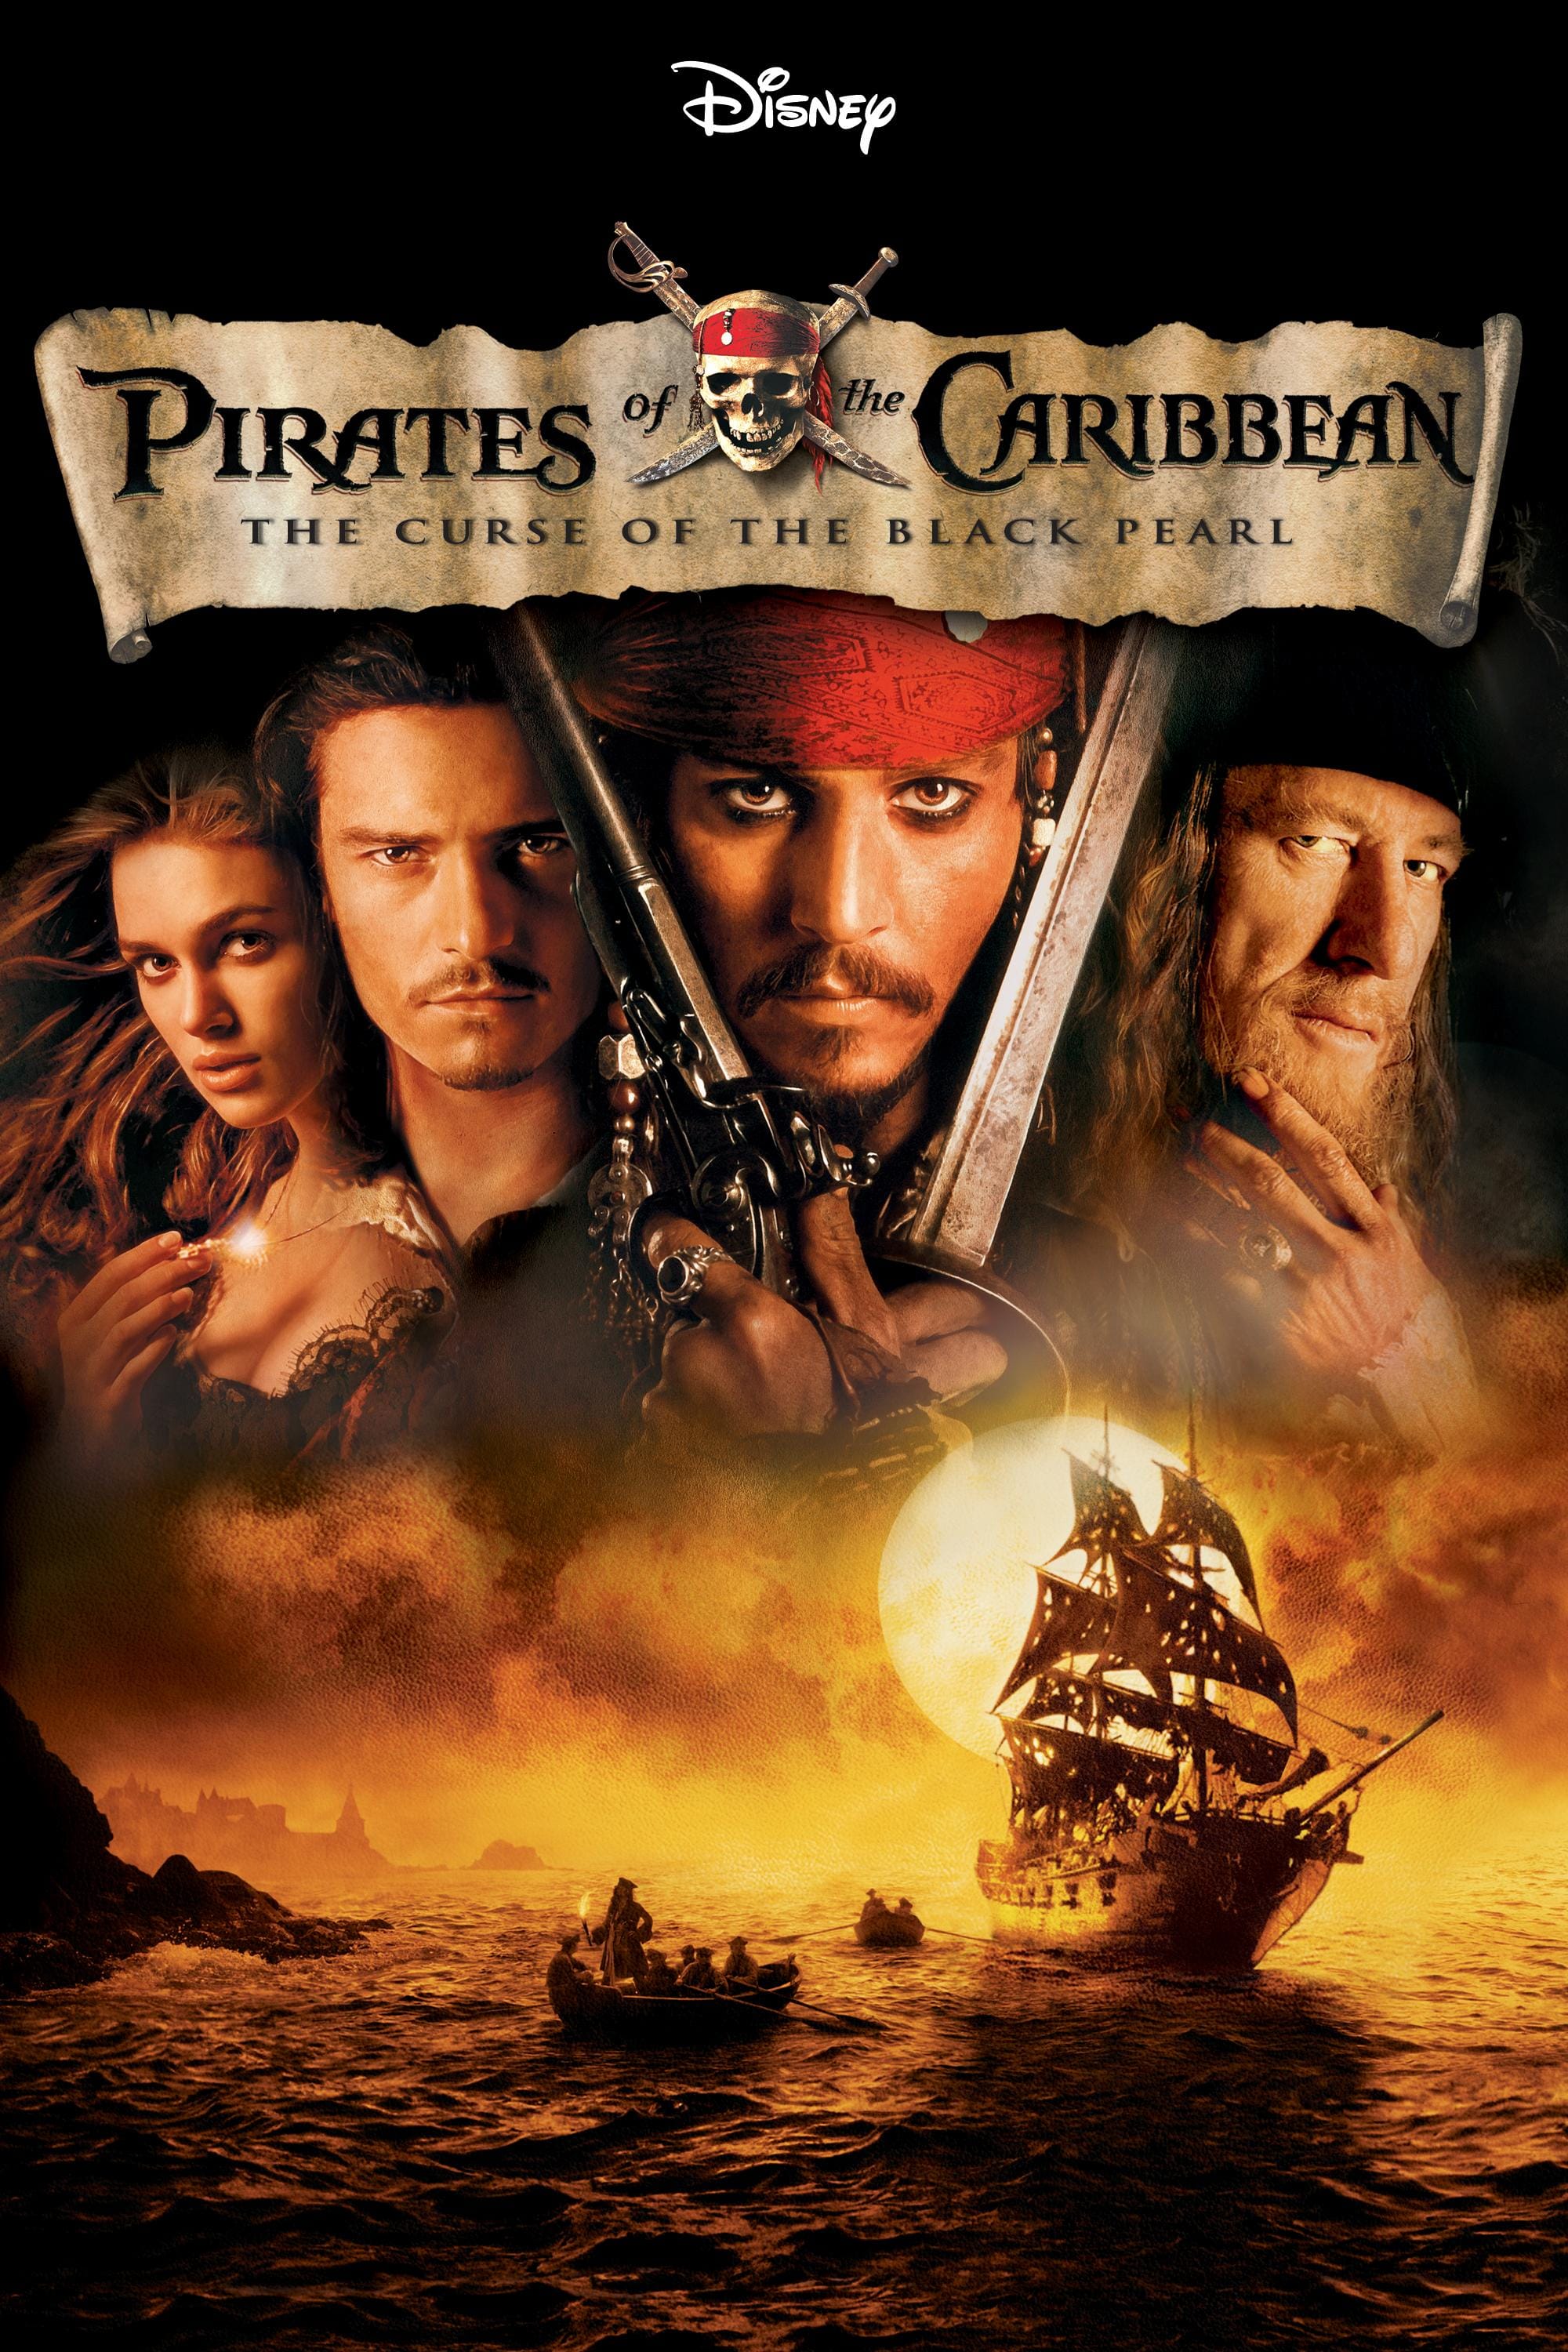 Pirates of the Caribbean: The Curse of the Black Pearl Rankings & Opinions